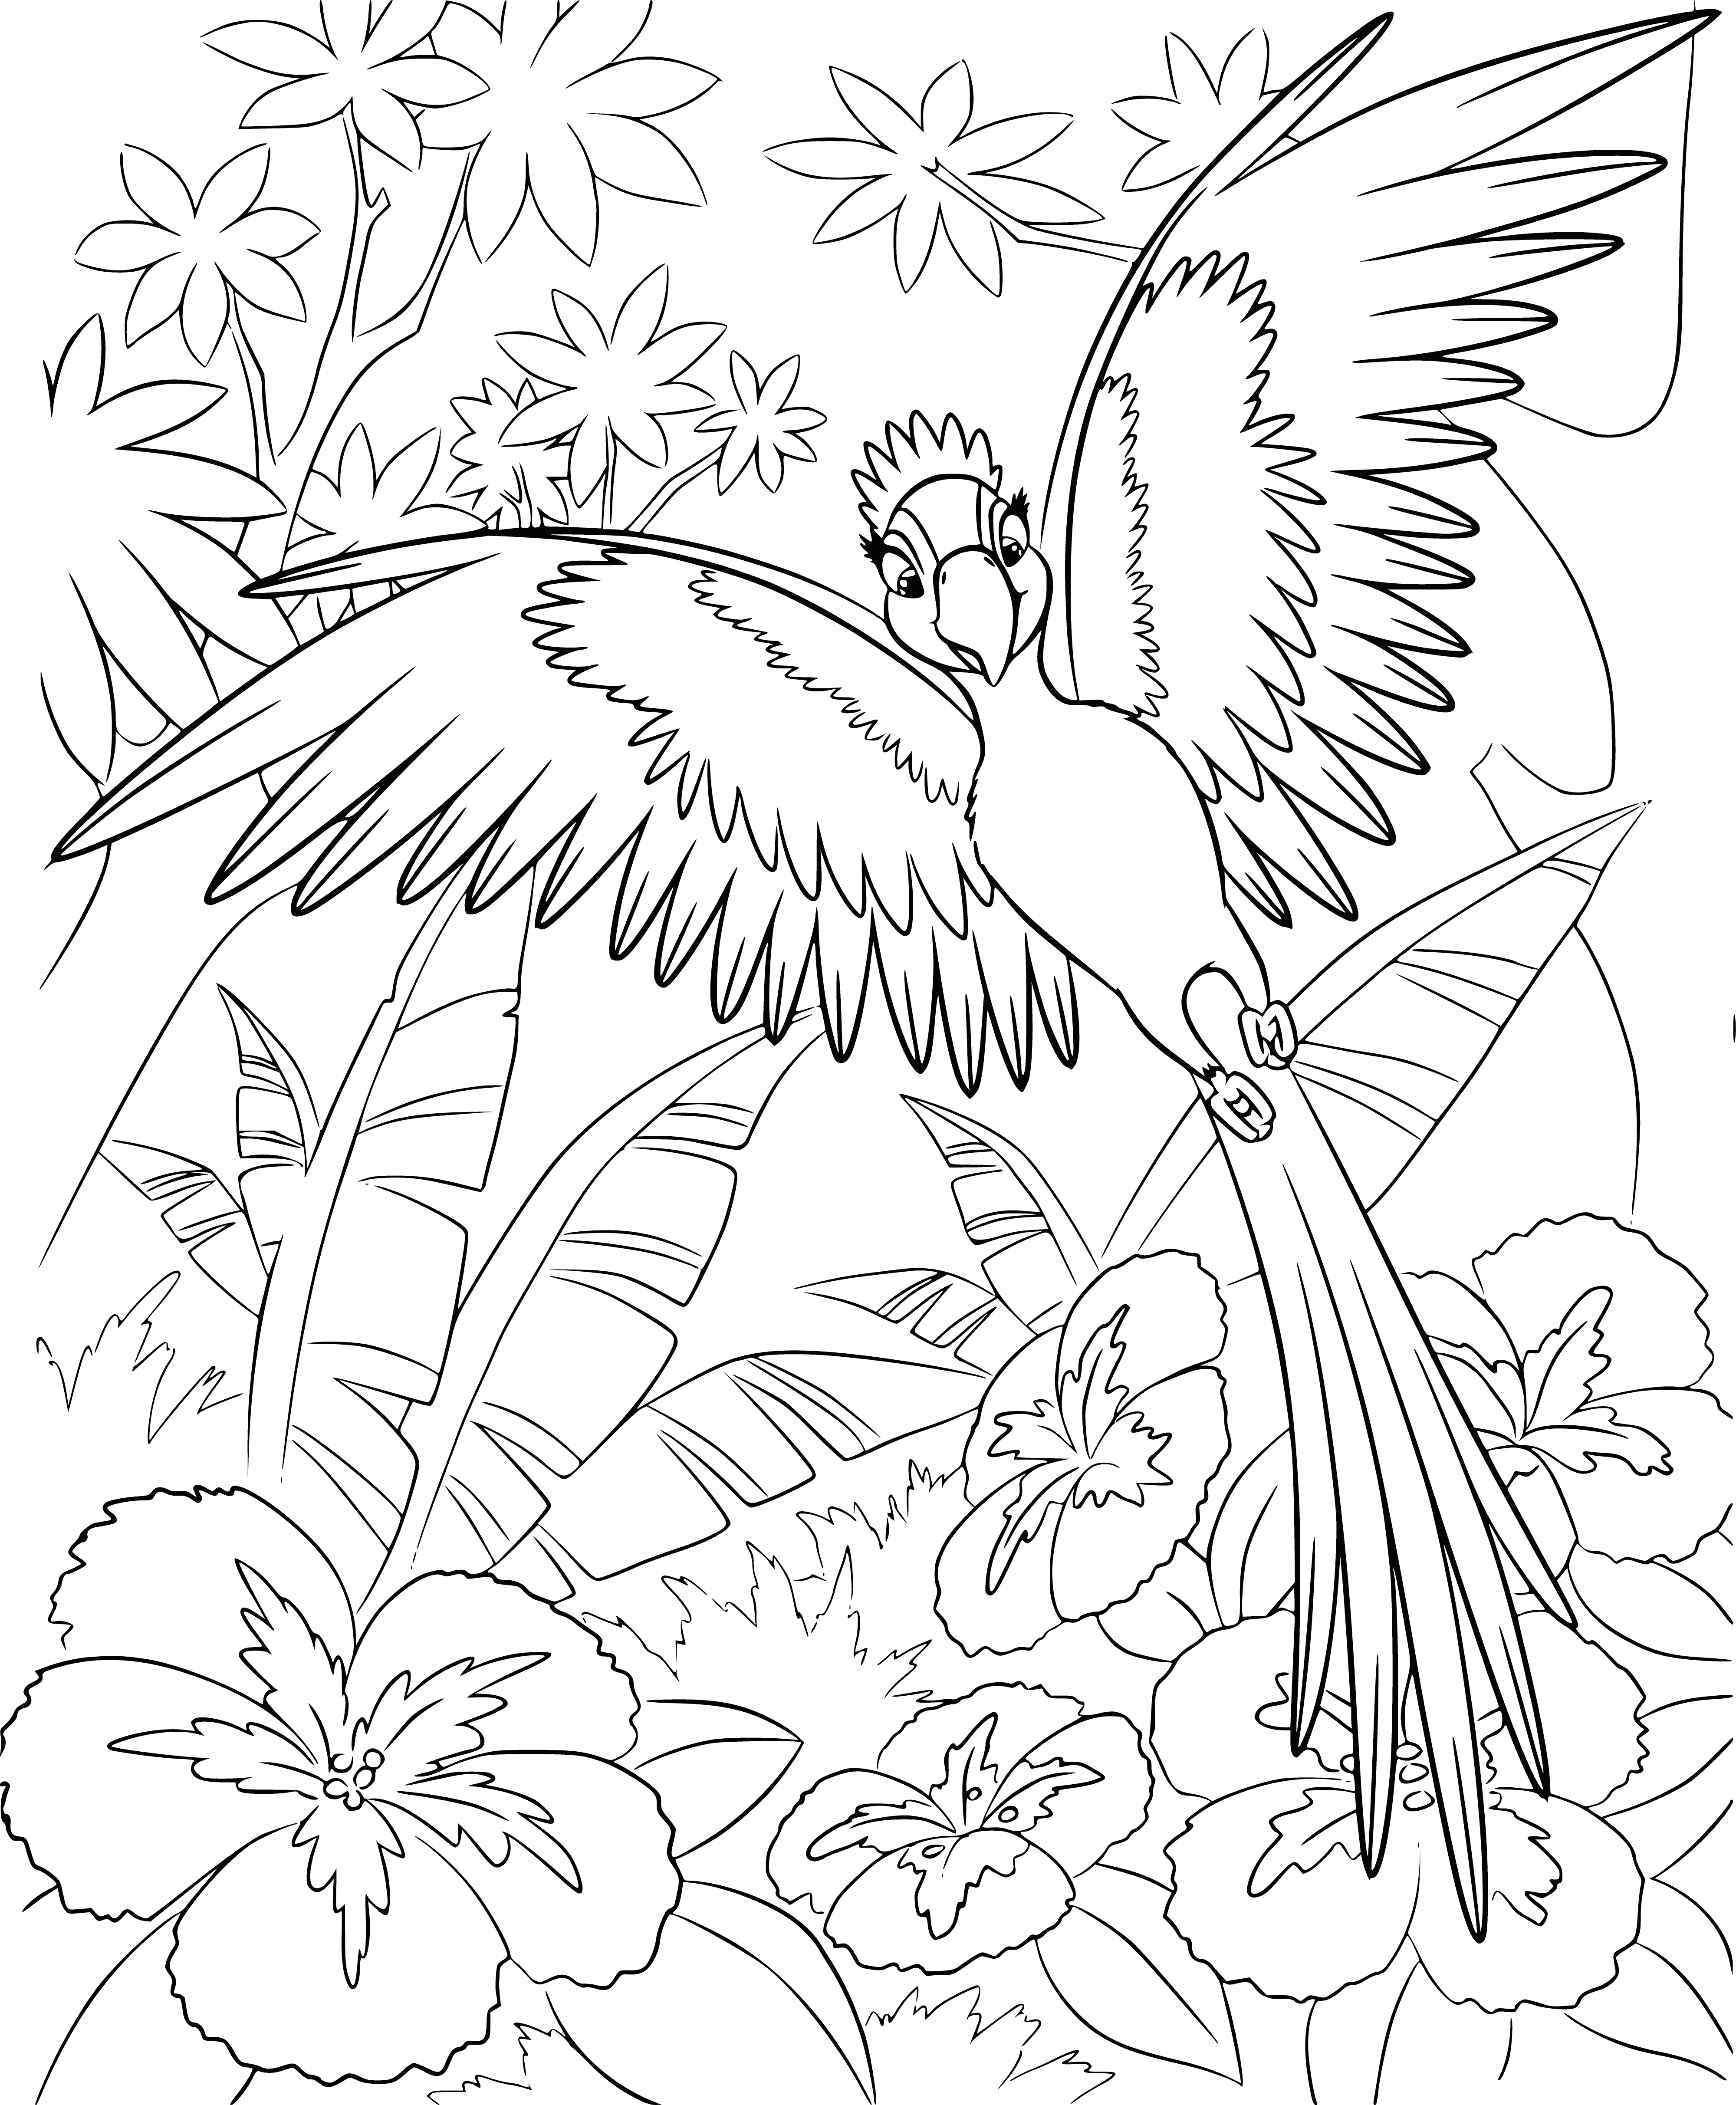 coloring page: Pearl on white background with light blue outline and small white pearls, with a blue gem on the bottom left.